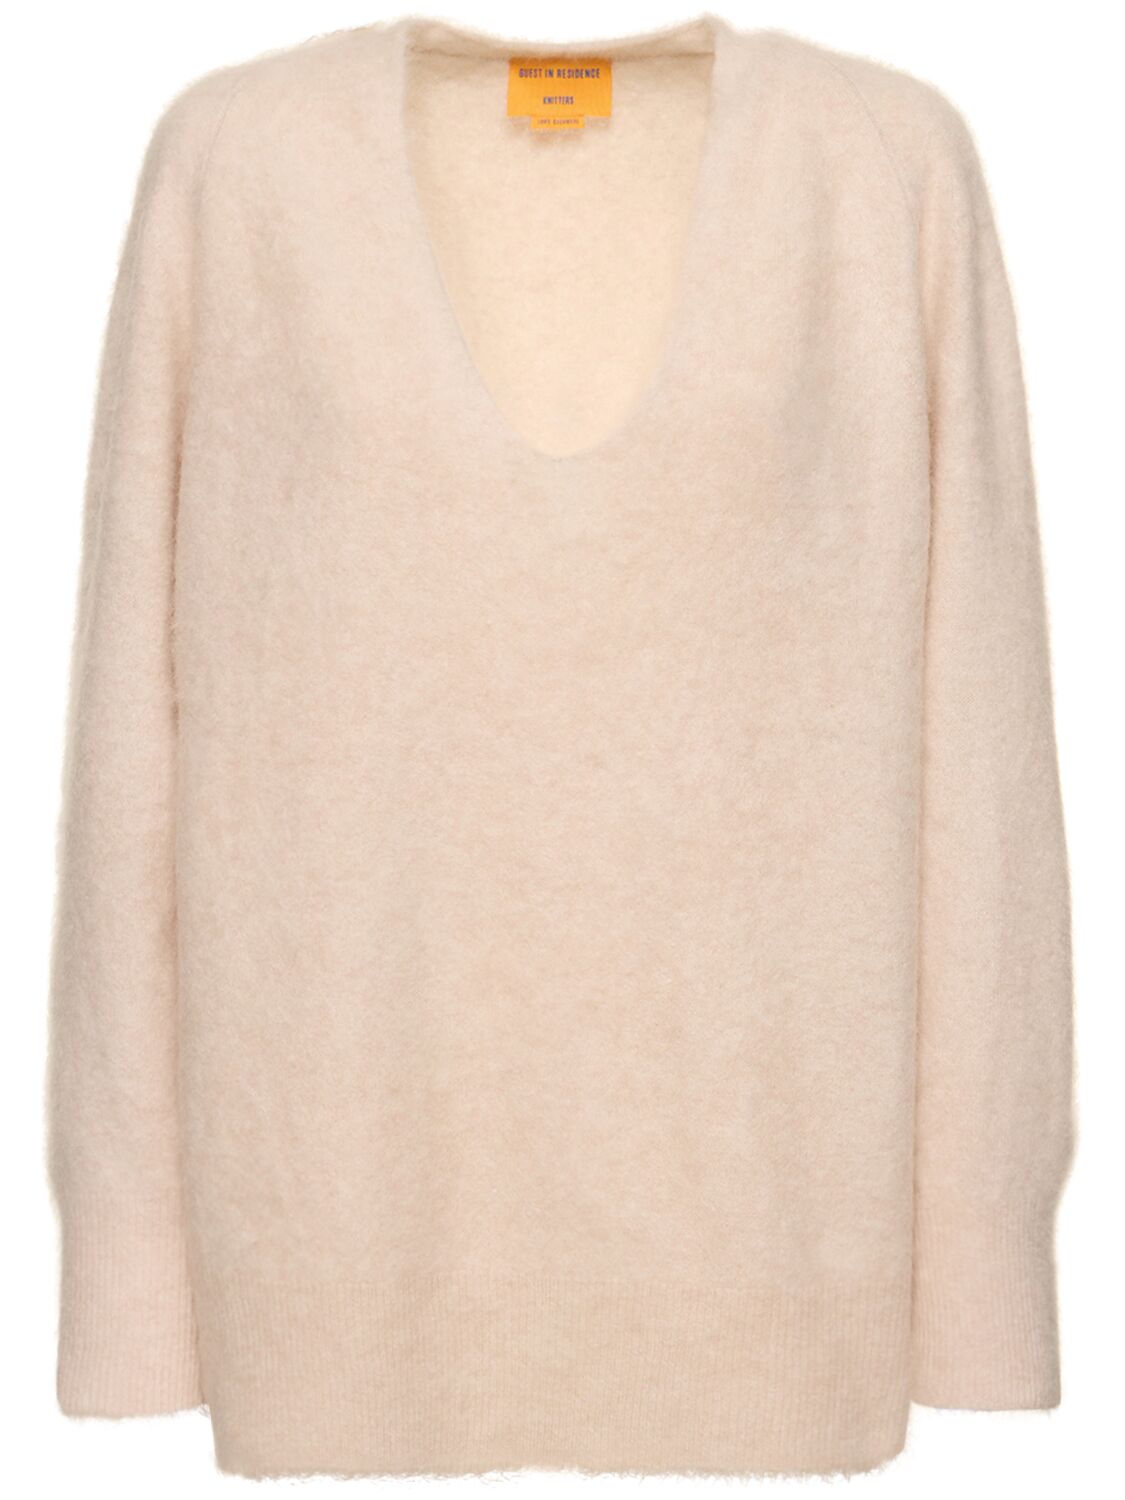 Image of Grizzly V Neck Cashmere Sweater